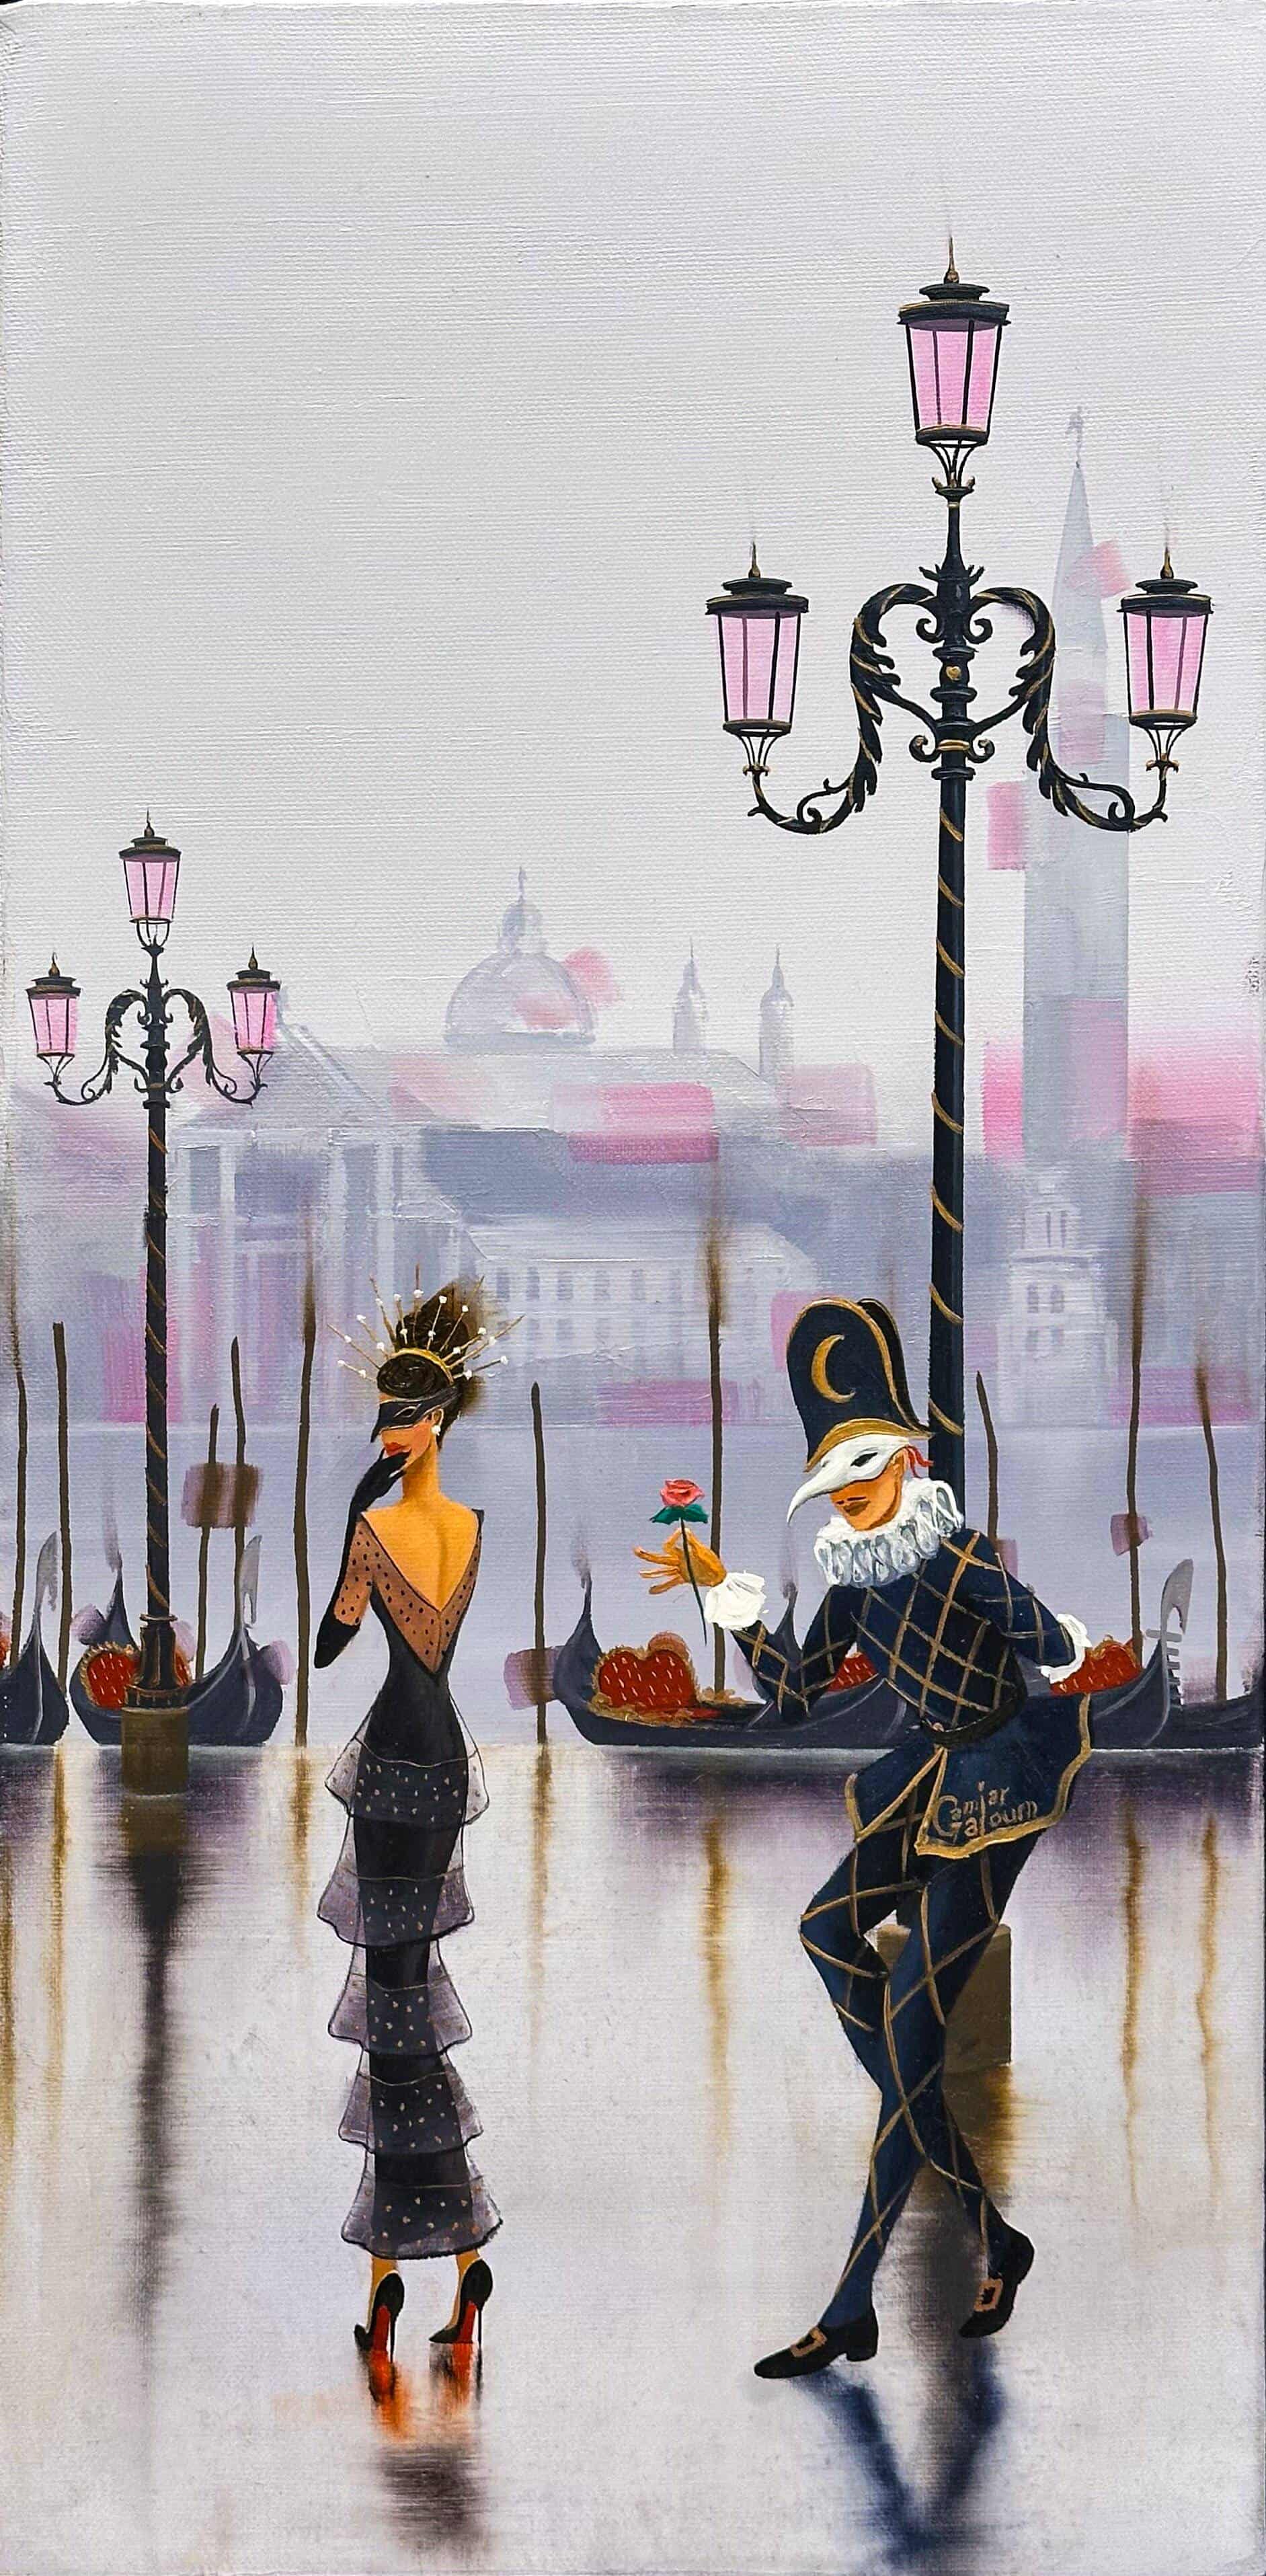 Contemporary Art. Title: Venice Carnival Experience, Oil on Canvas, 20 x 10 in by Canadian Artist Kamiar Gajoum.